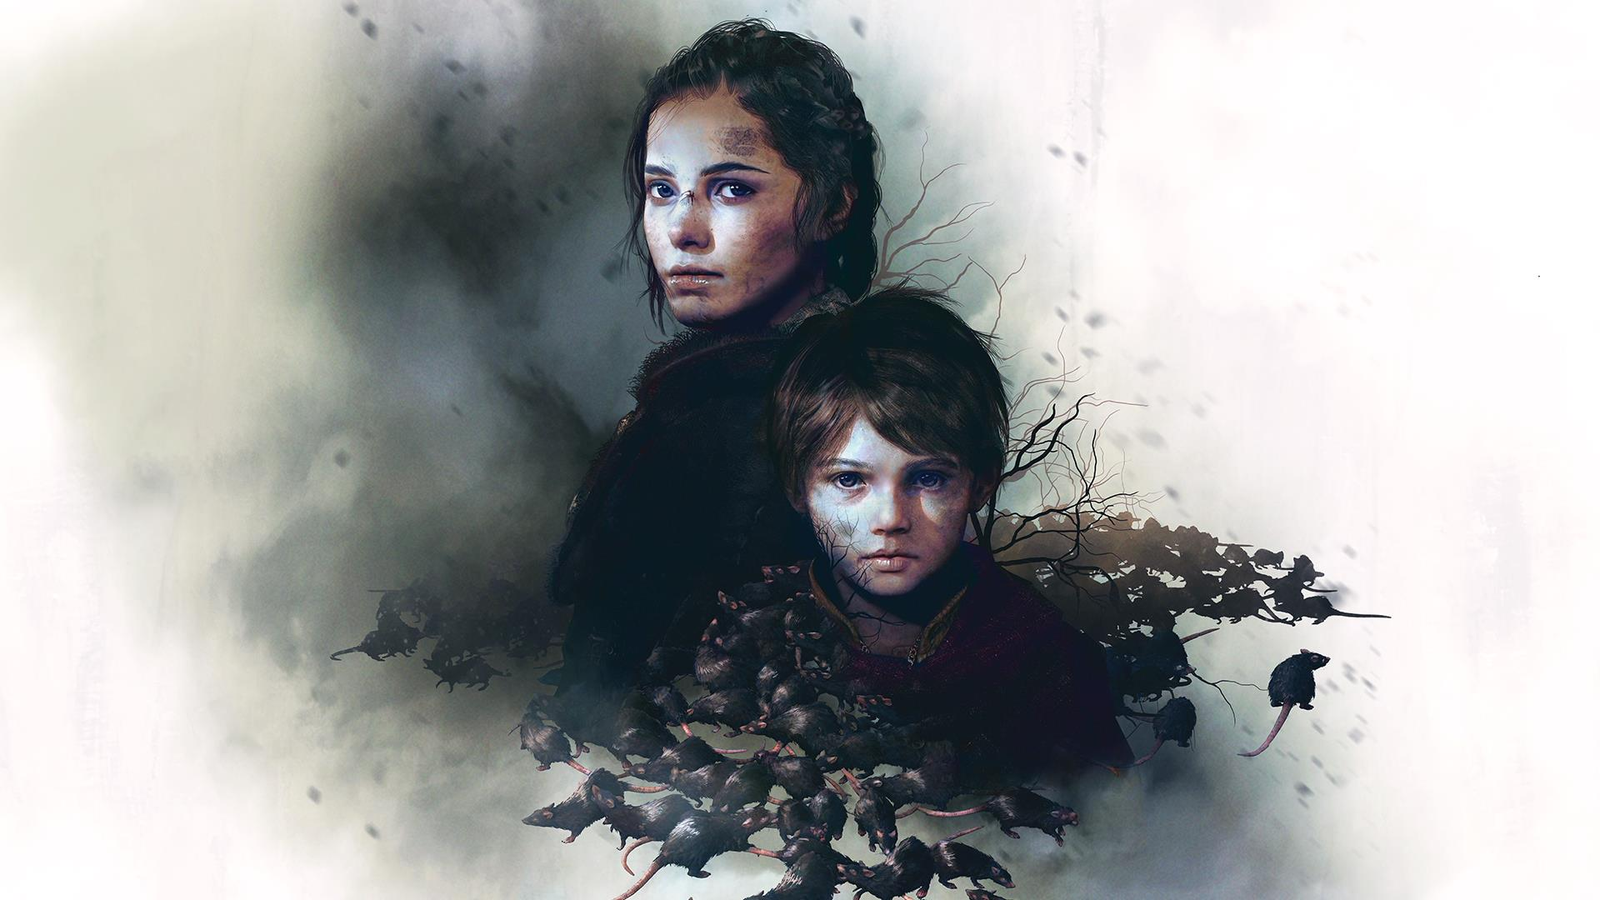 A Plague Tale: Innocence and More Coming to Xbox Game Pass